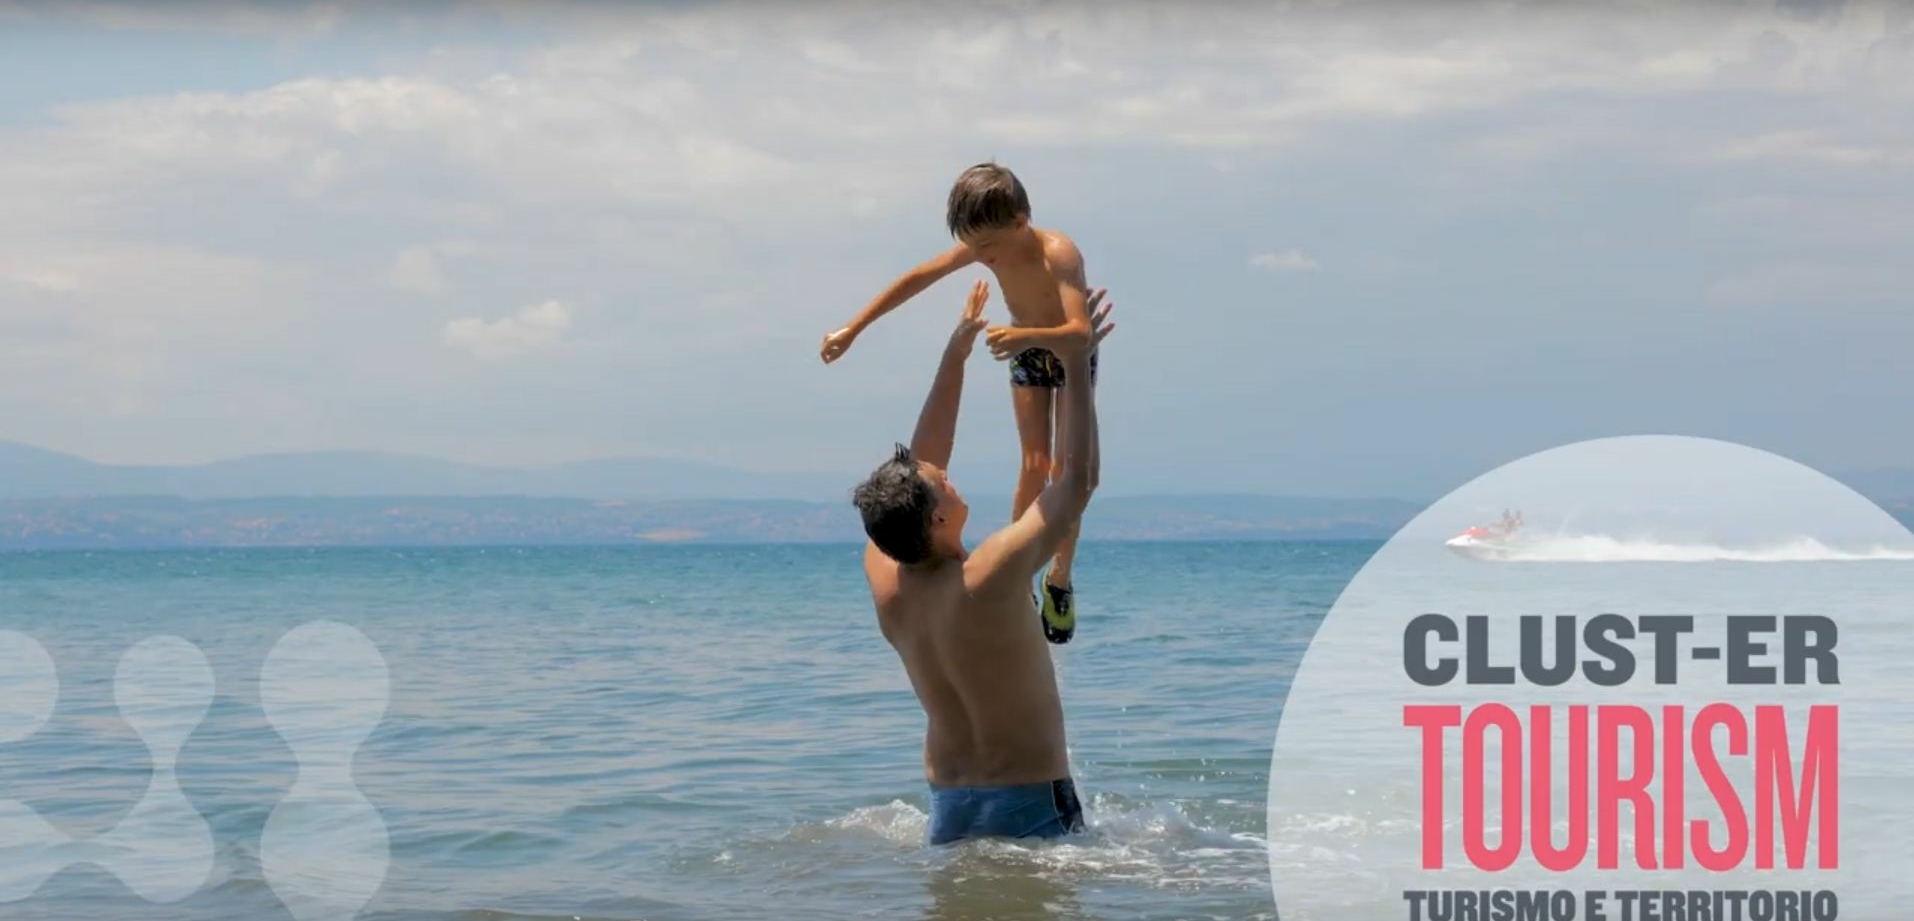 screenshot with man throwing child in the air at the beach in sea